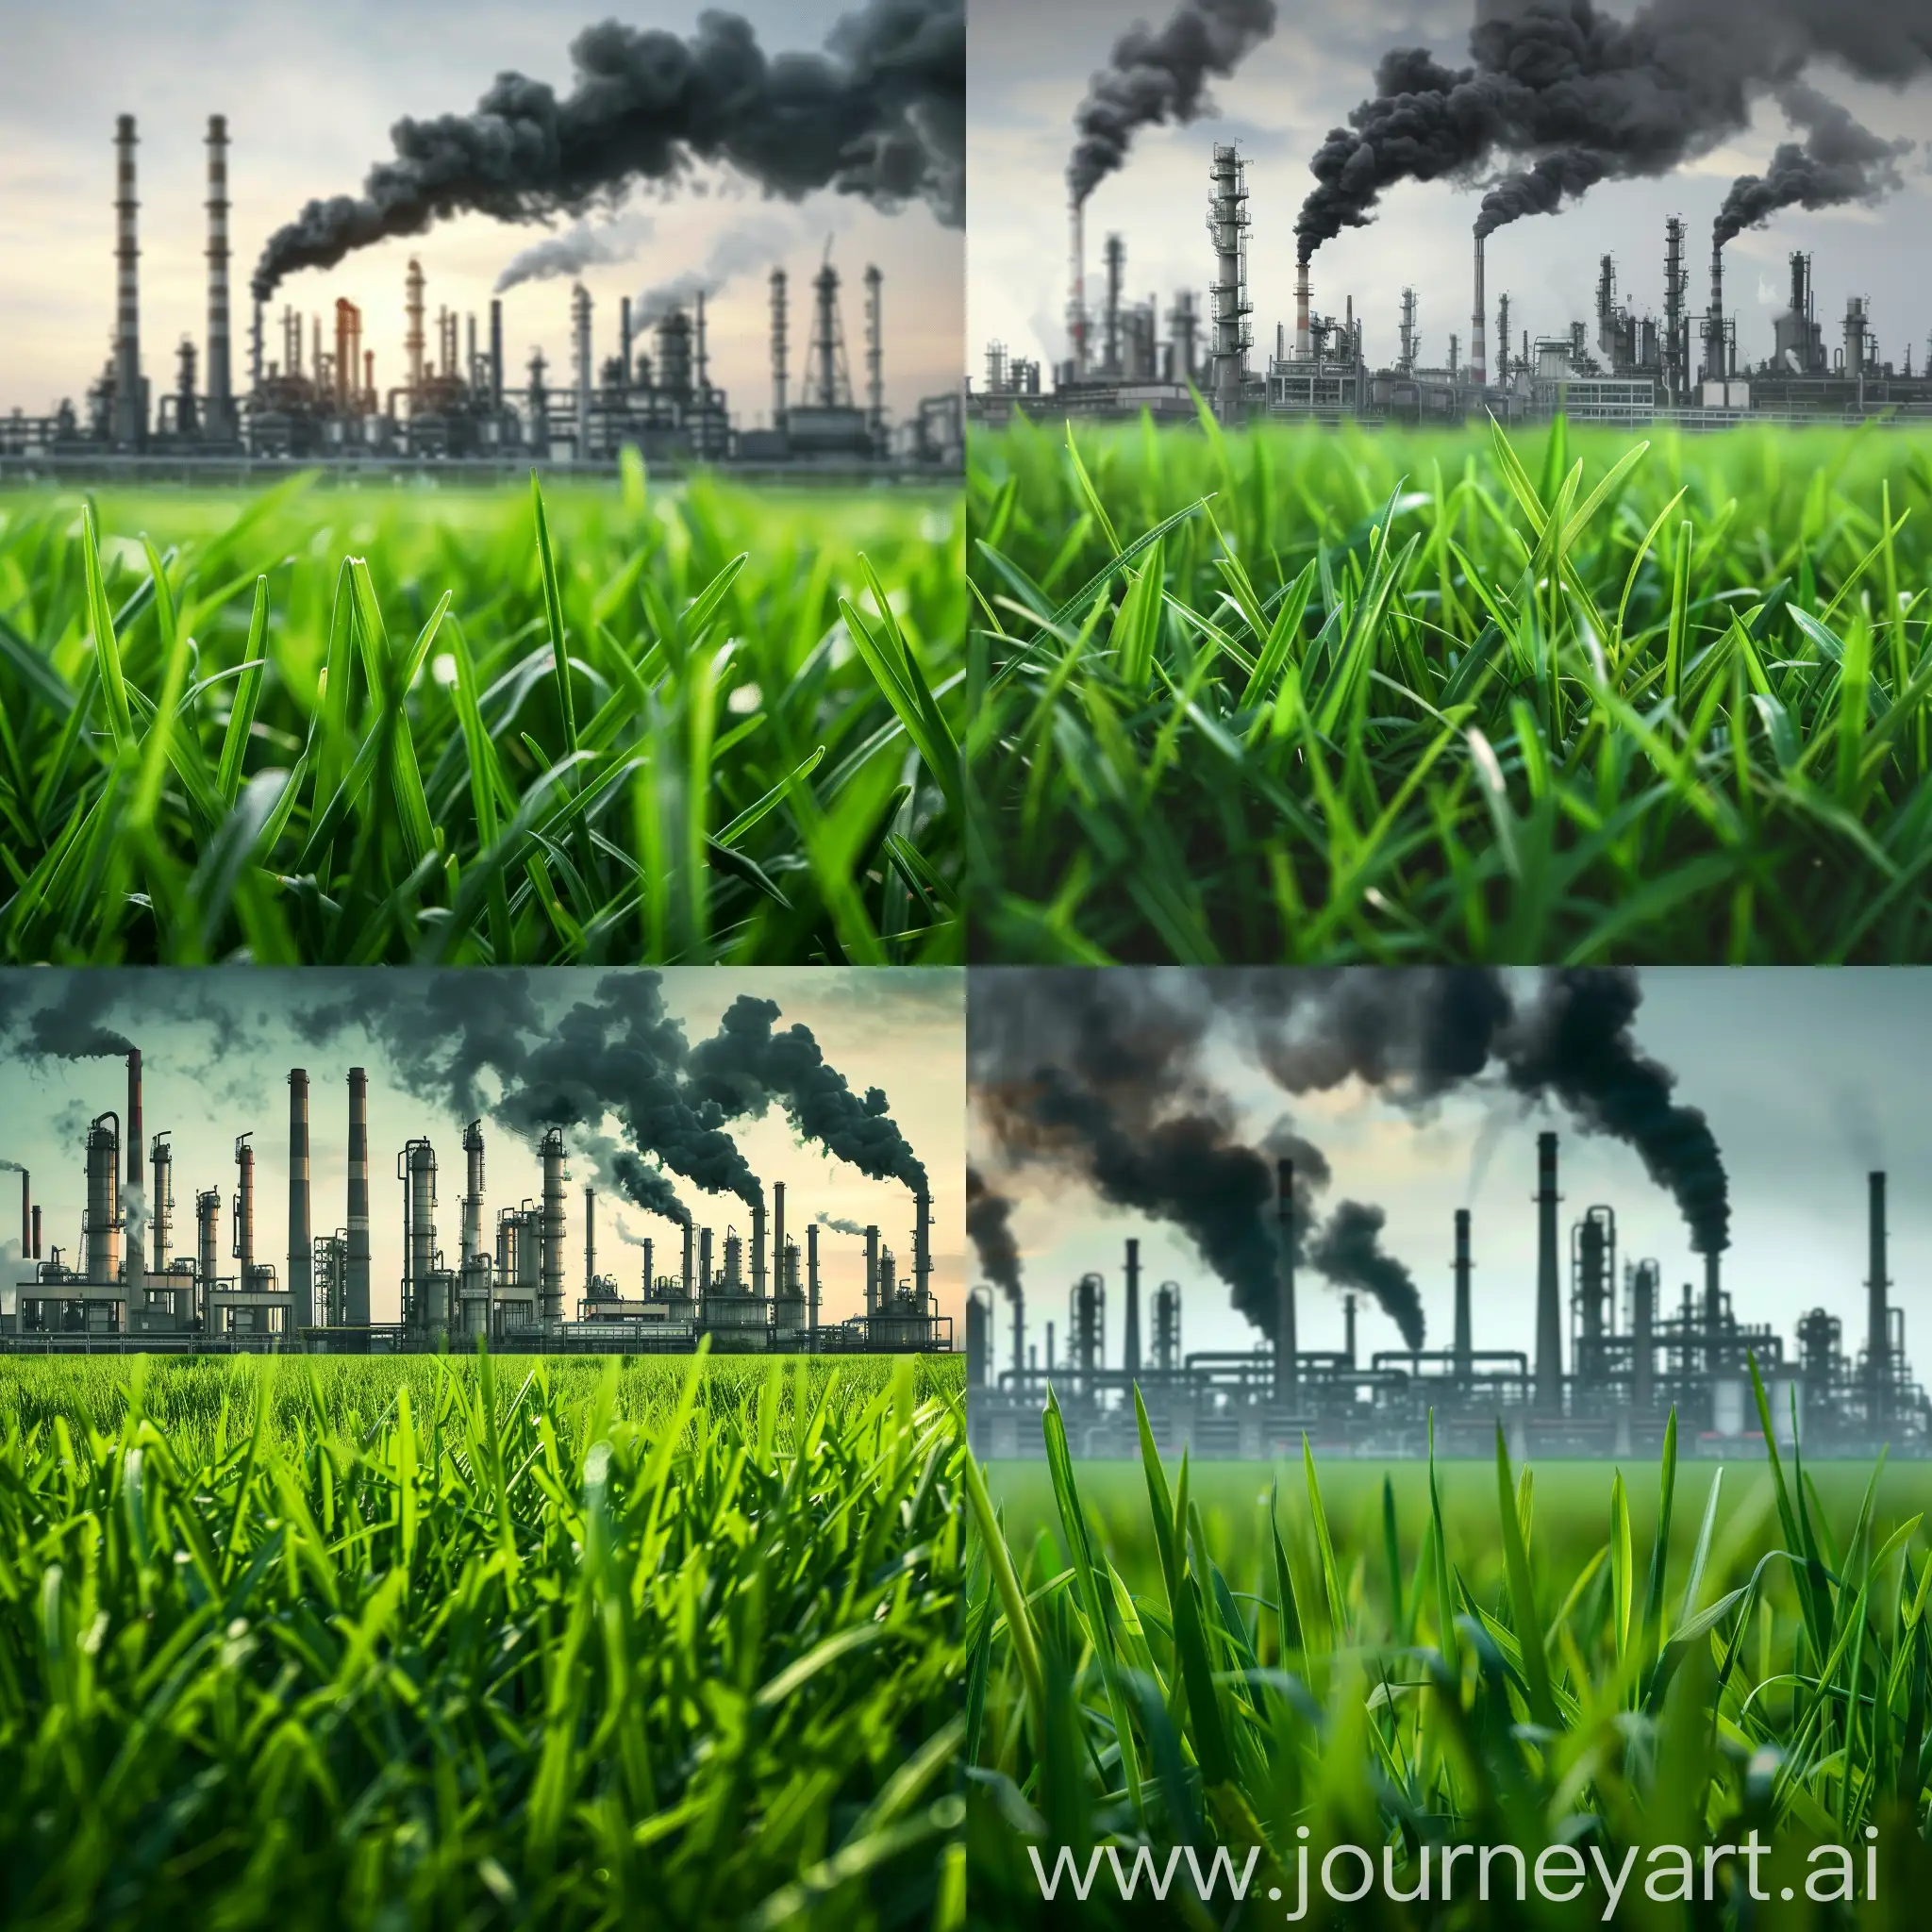 Pollution-from-Industrial-Factories-Amidst-Green-Grass